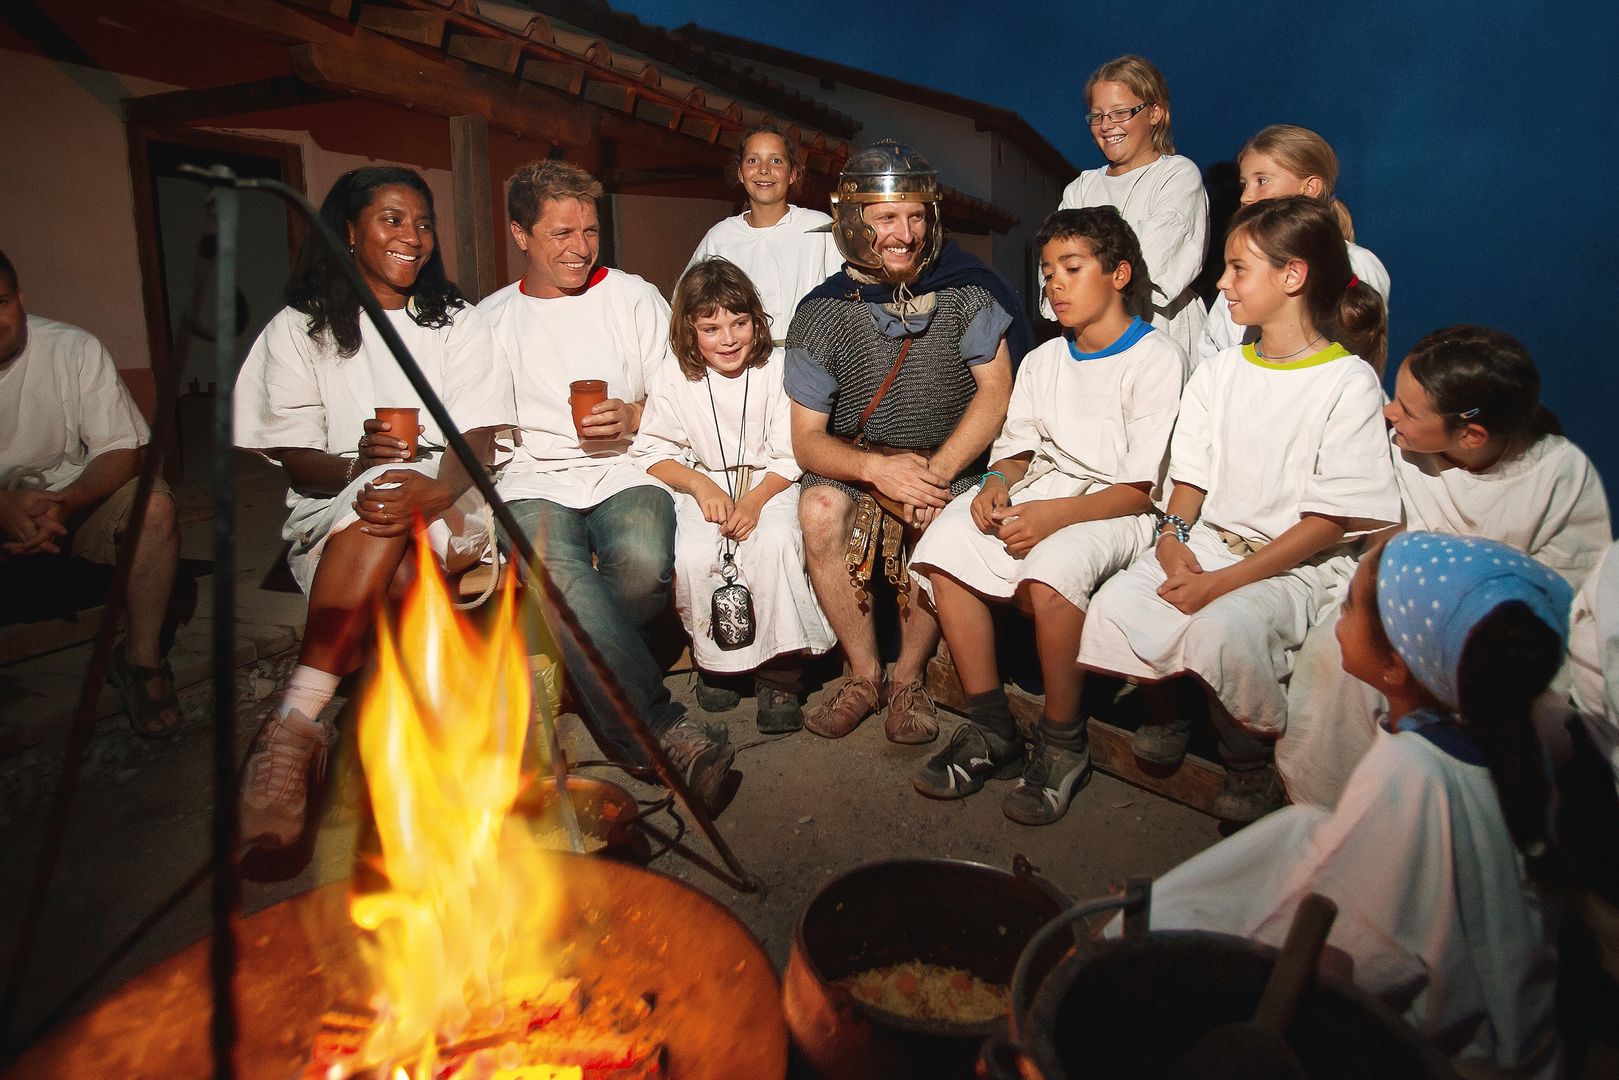 A group is sitting around a fire. A large part of the group is dressed in white tops. One man is dressed as a legionnaire. 